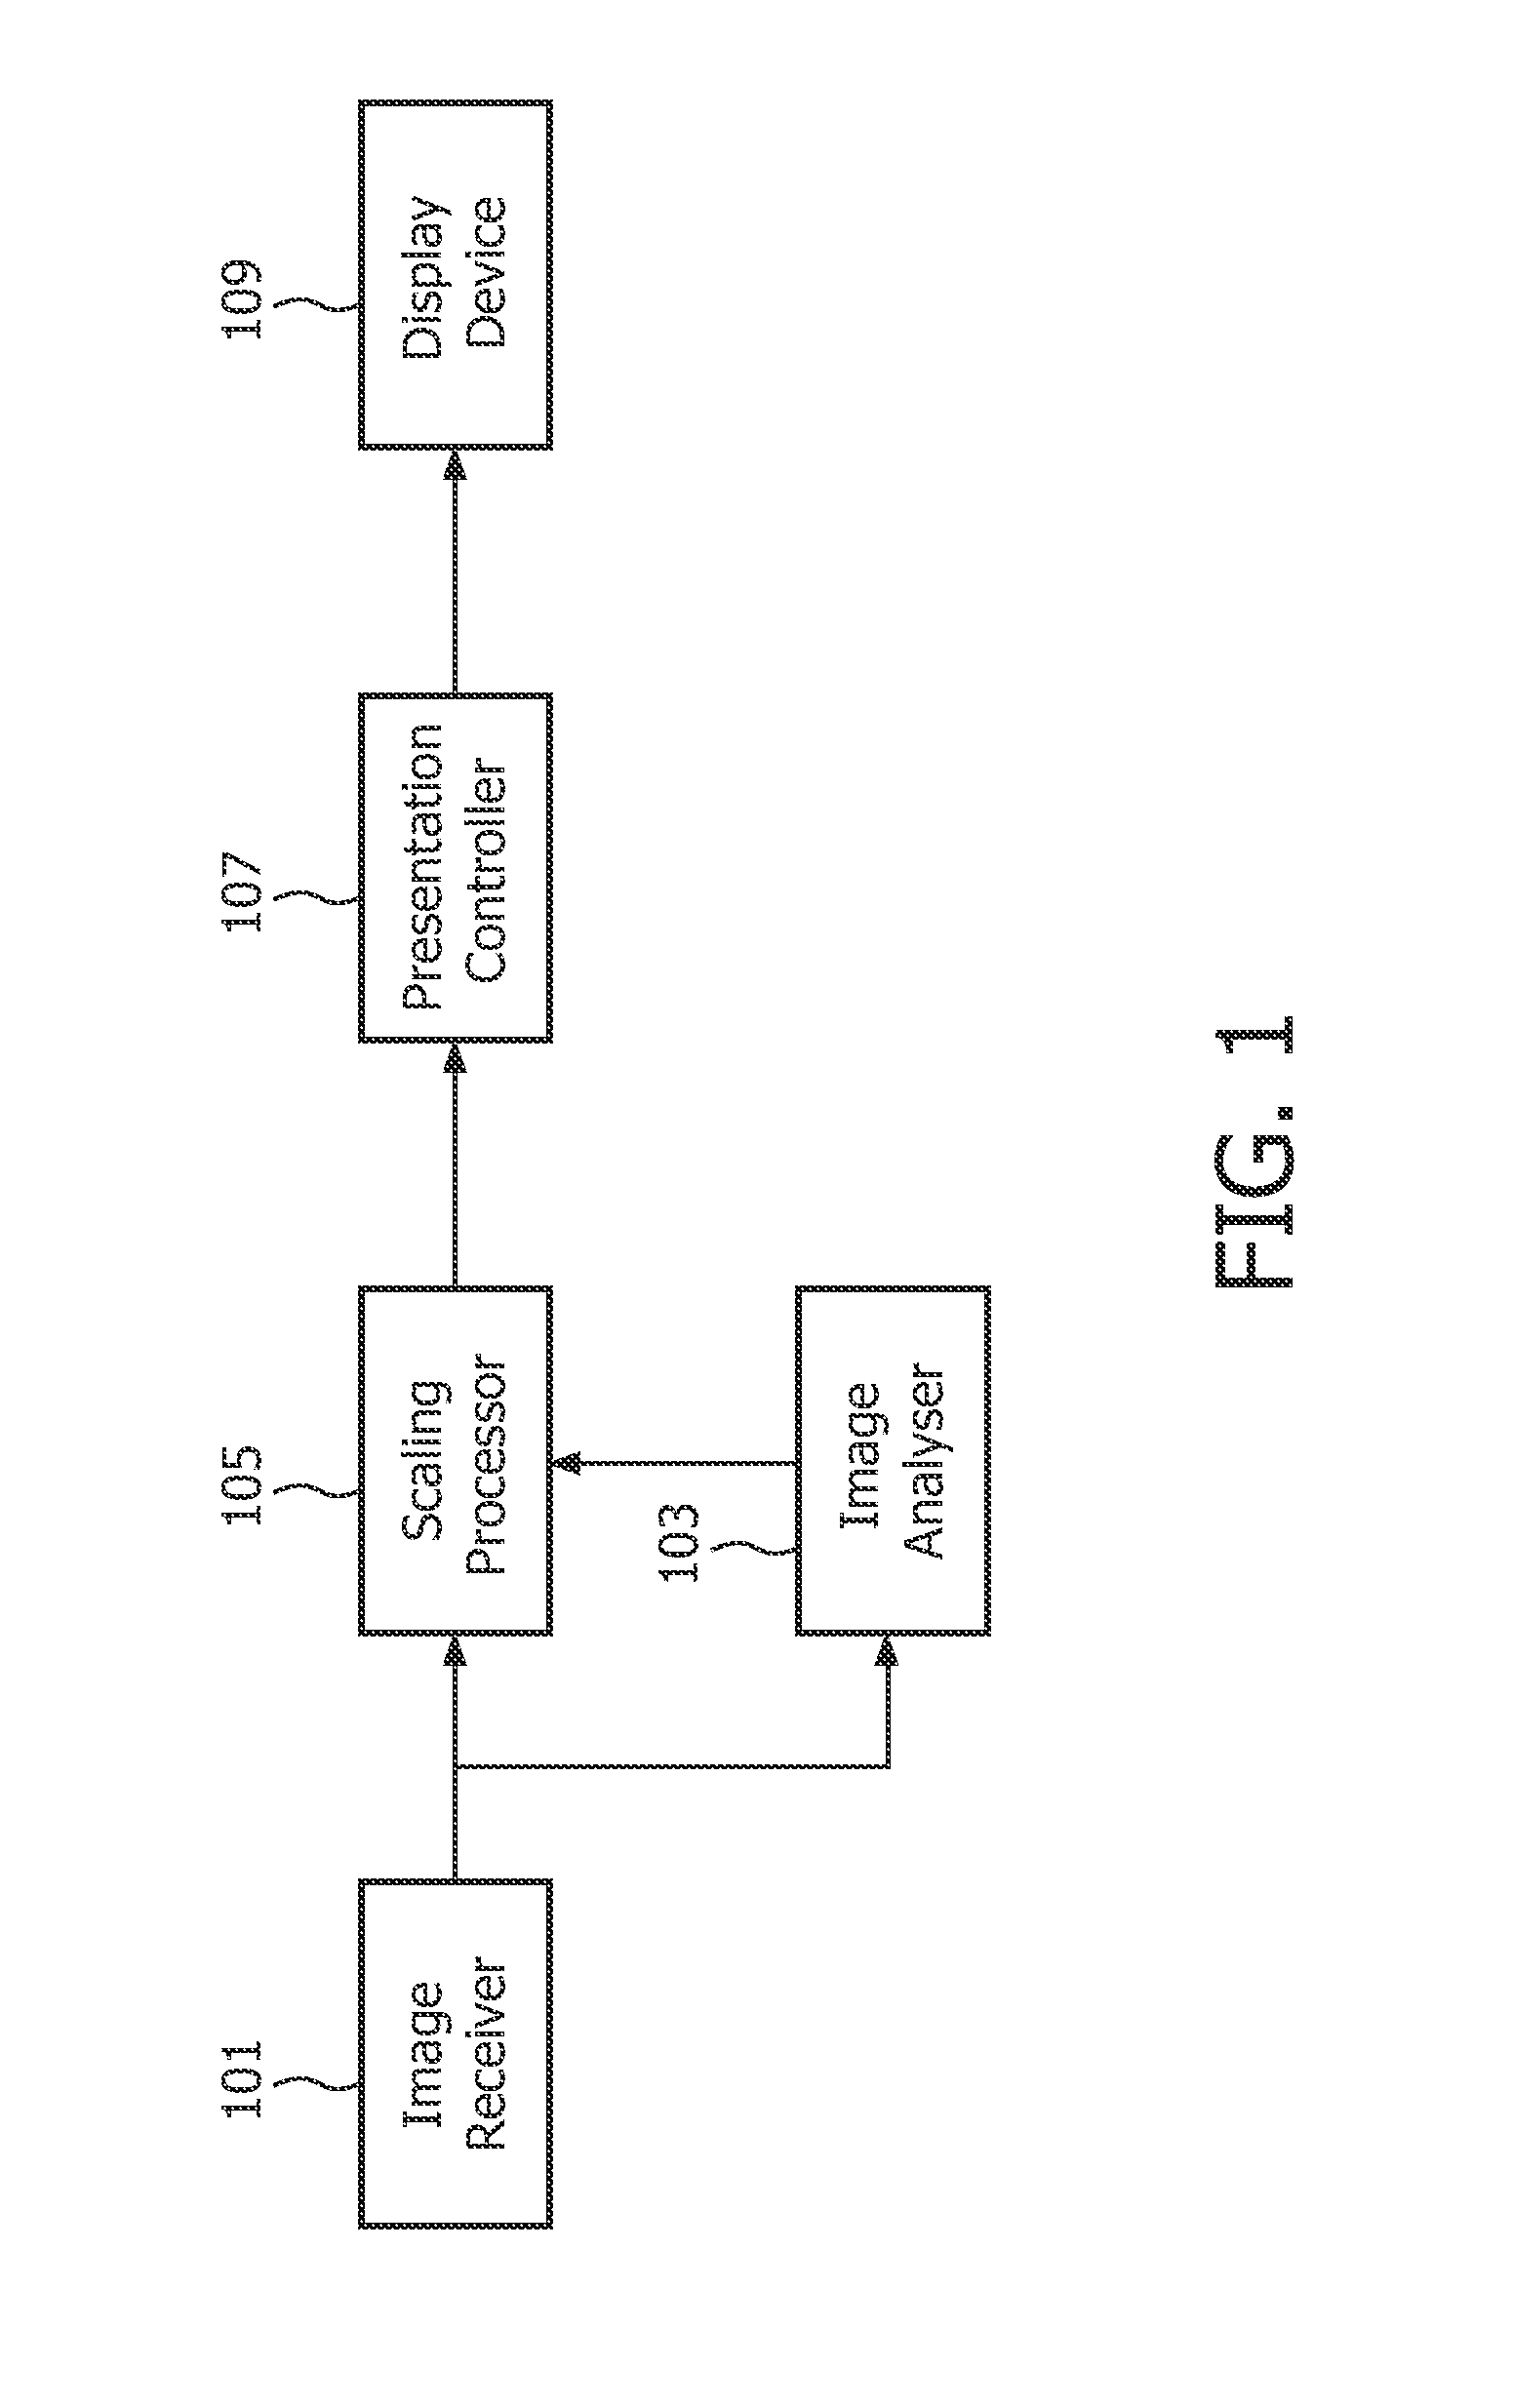 Display apparatus and a method therefor